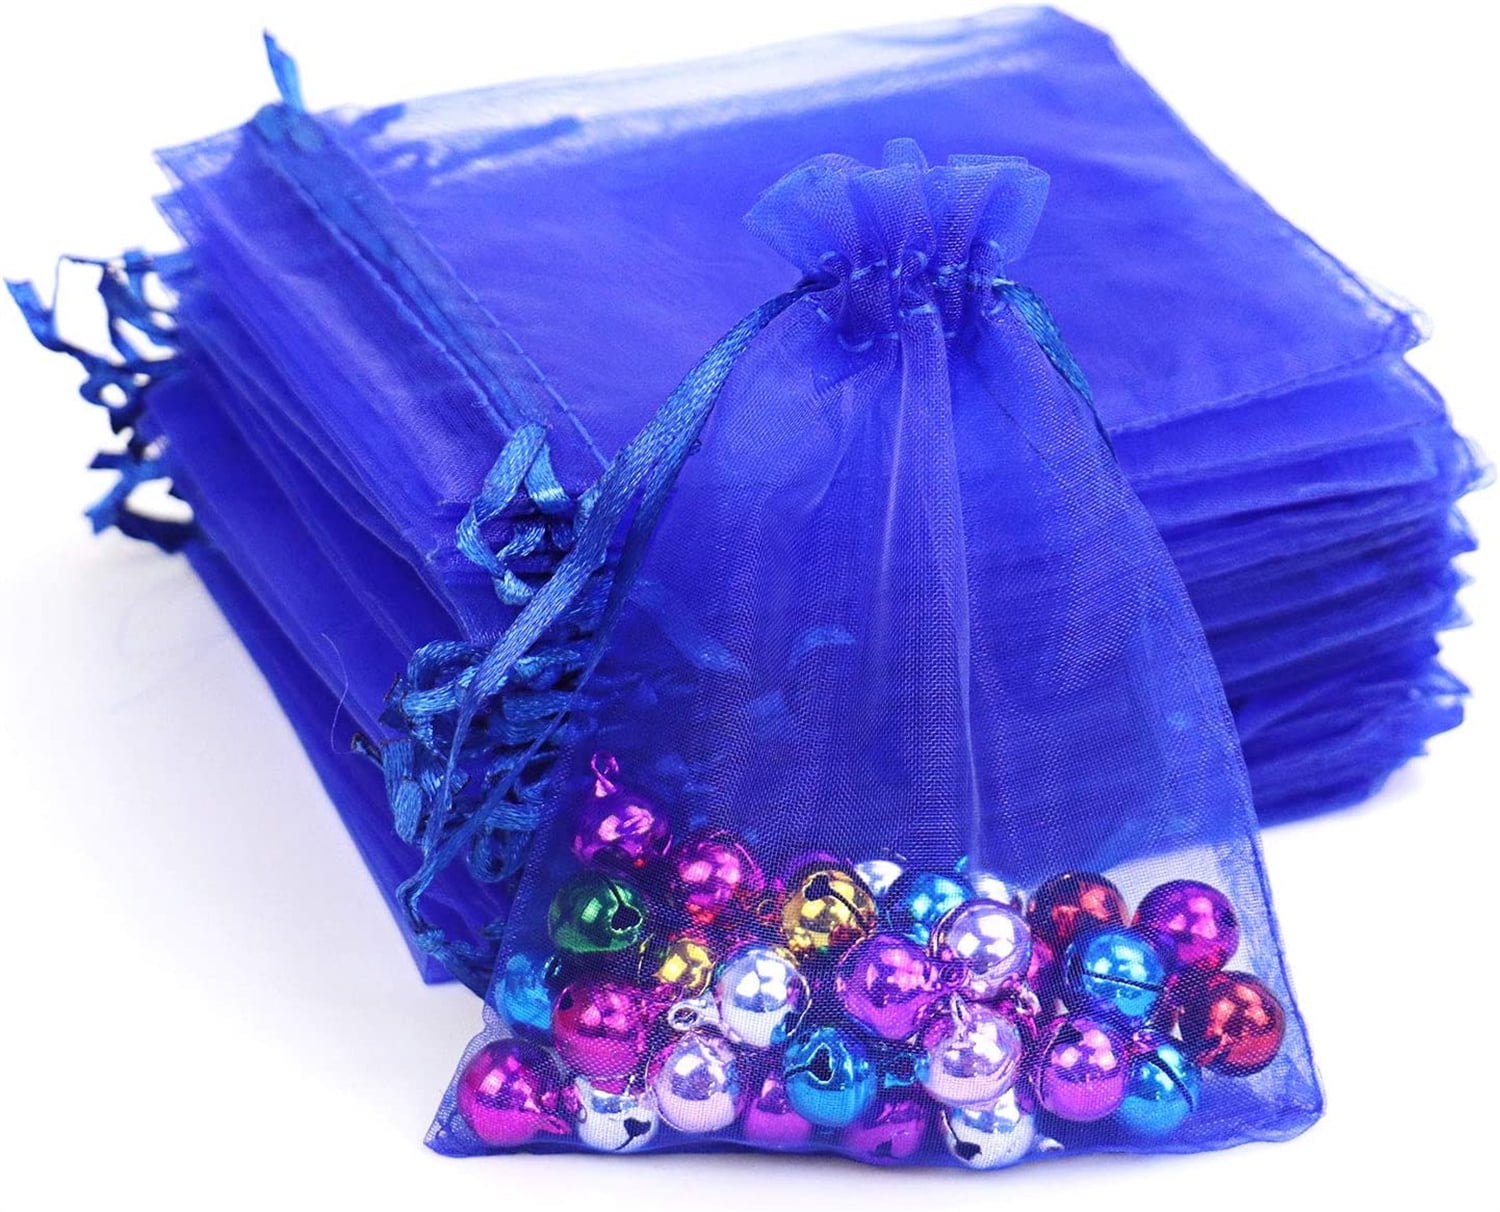 Casewin 4x6 Inches Purple Organza Bags for Jewelry Party Wedding Favor Party  Festival Candy, 100 PCS Premium Drawstring Organza Gift Jewelry Pouches 